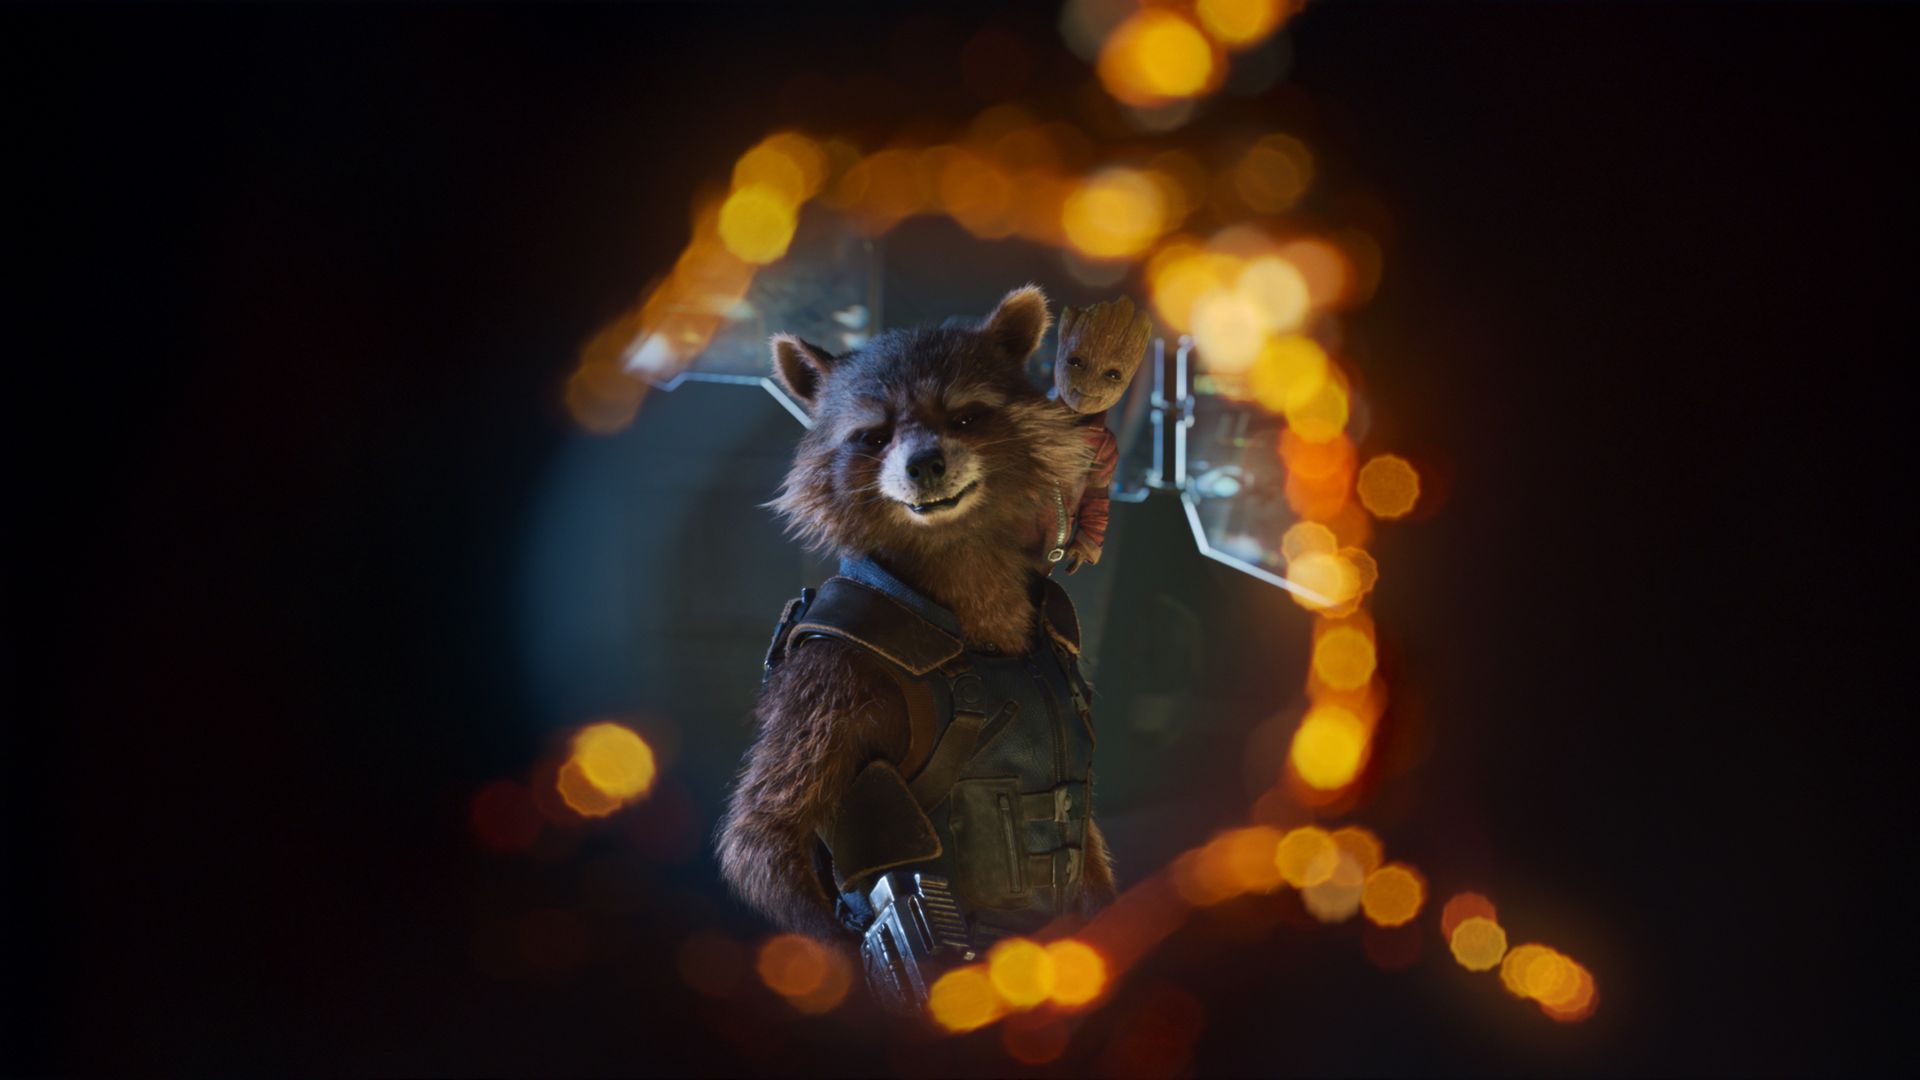 Wallpaper Baby groot and rocket, guardians of galaxy vol. 2 movie